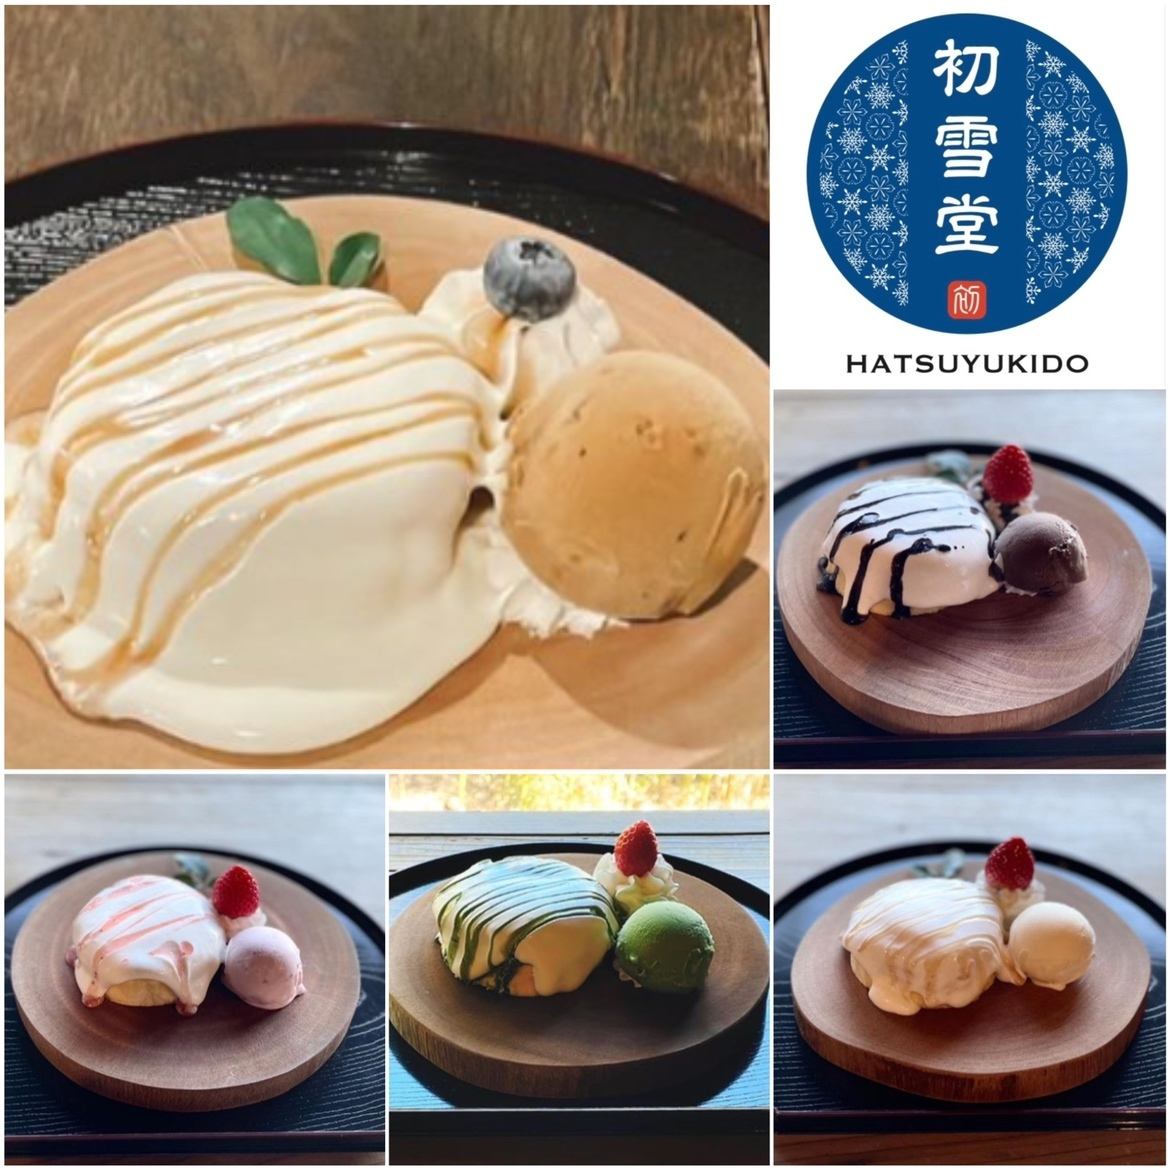 [Very popular] Our proud fluffy pancakes♪ Please try them!